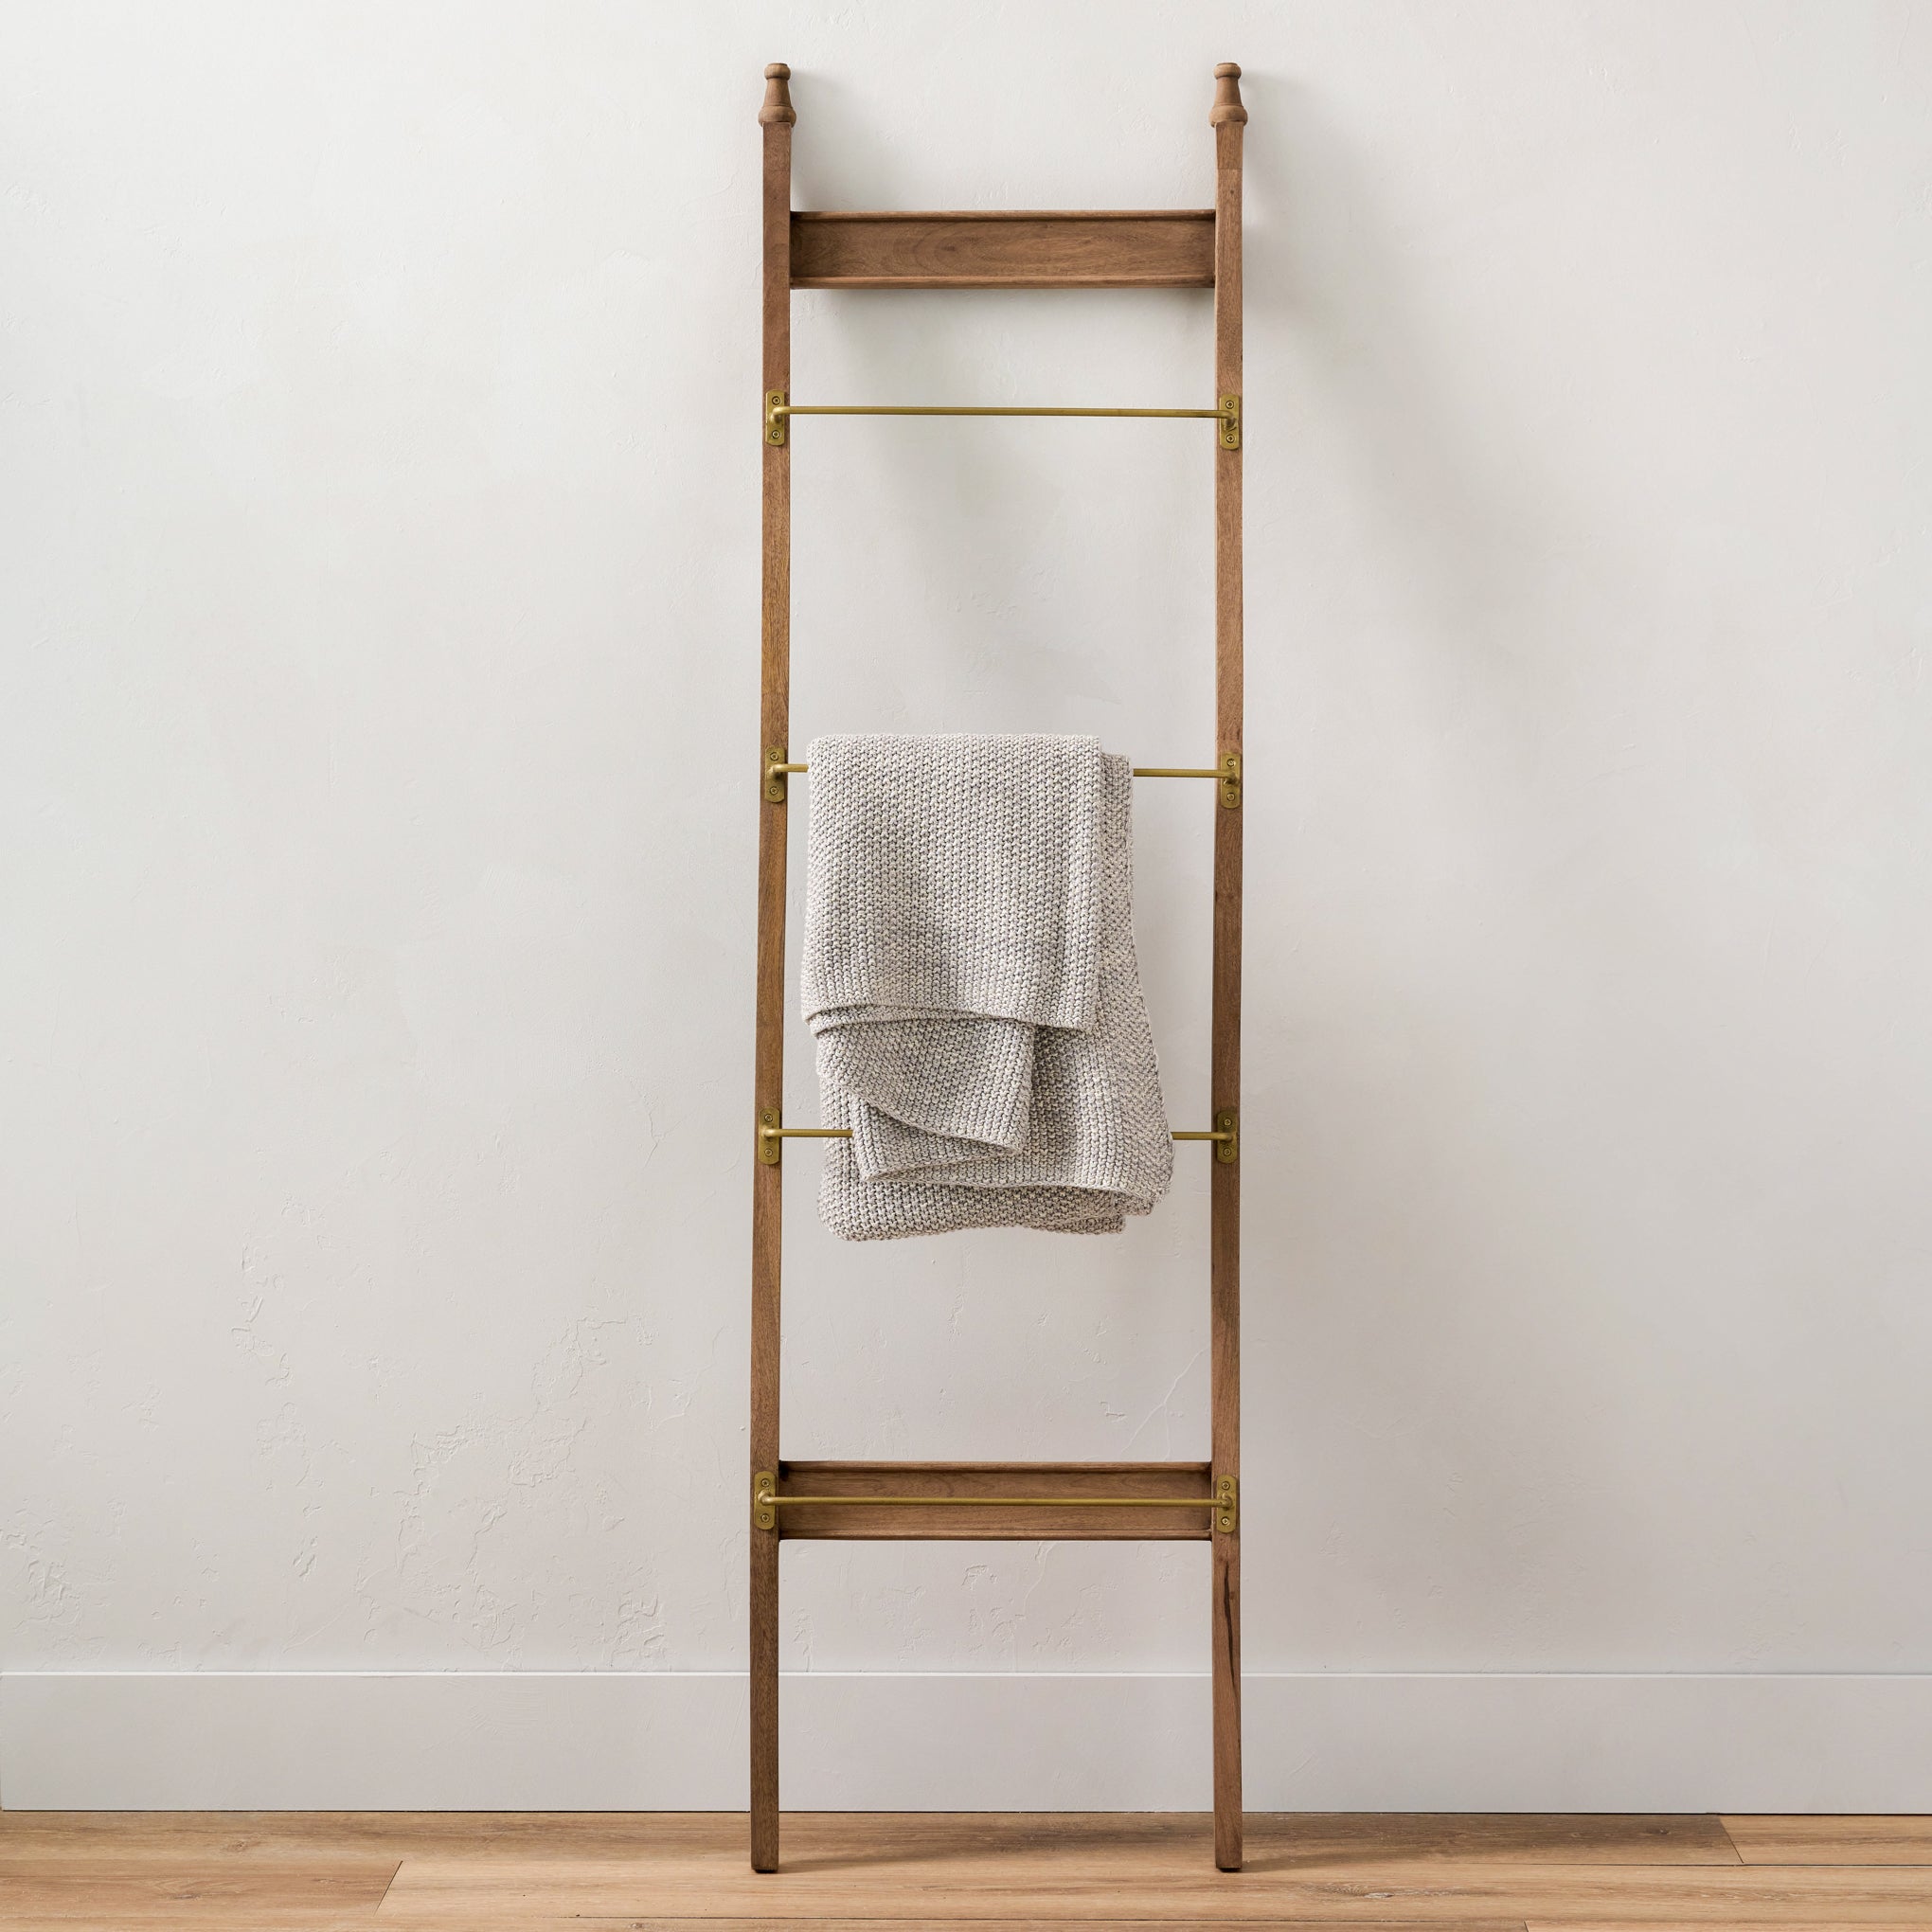 Brass and Wood Library Ladder with blanket hanging $108.00